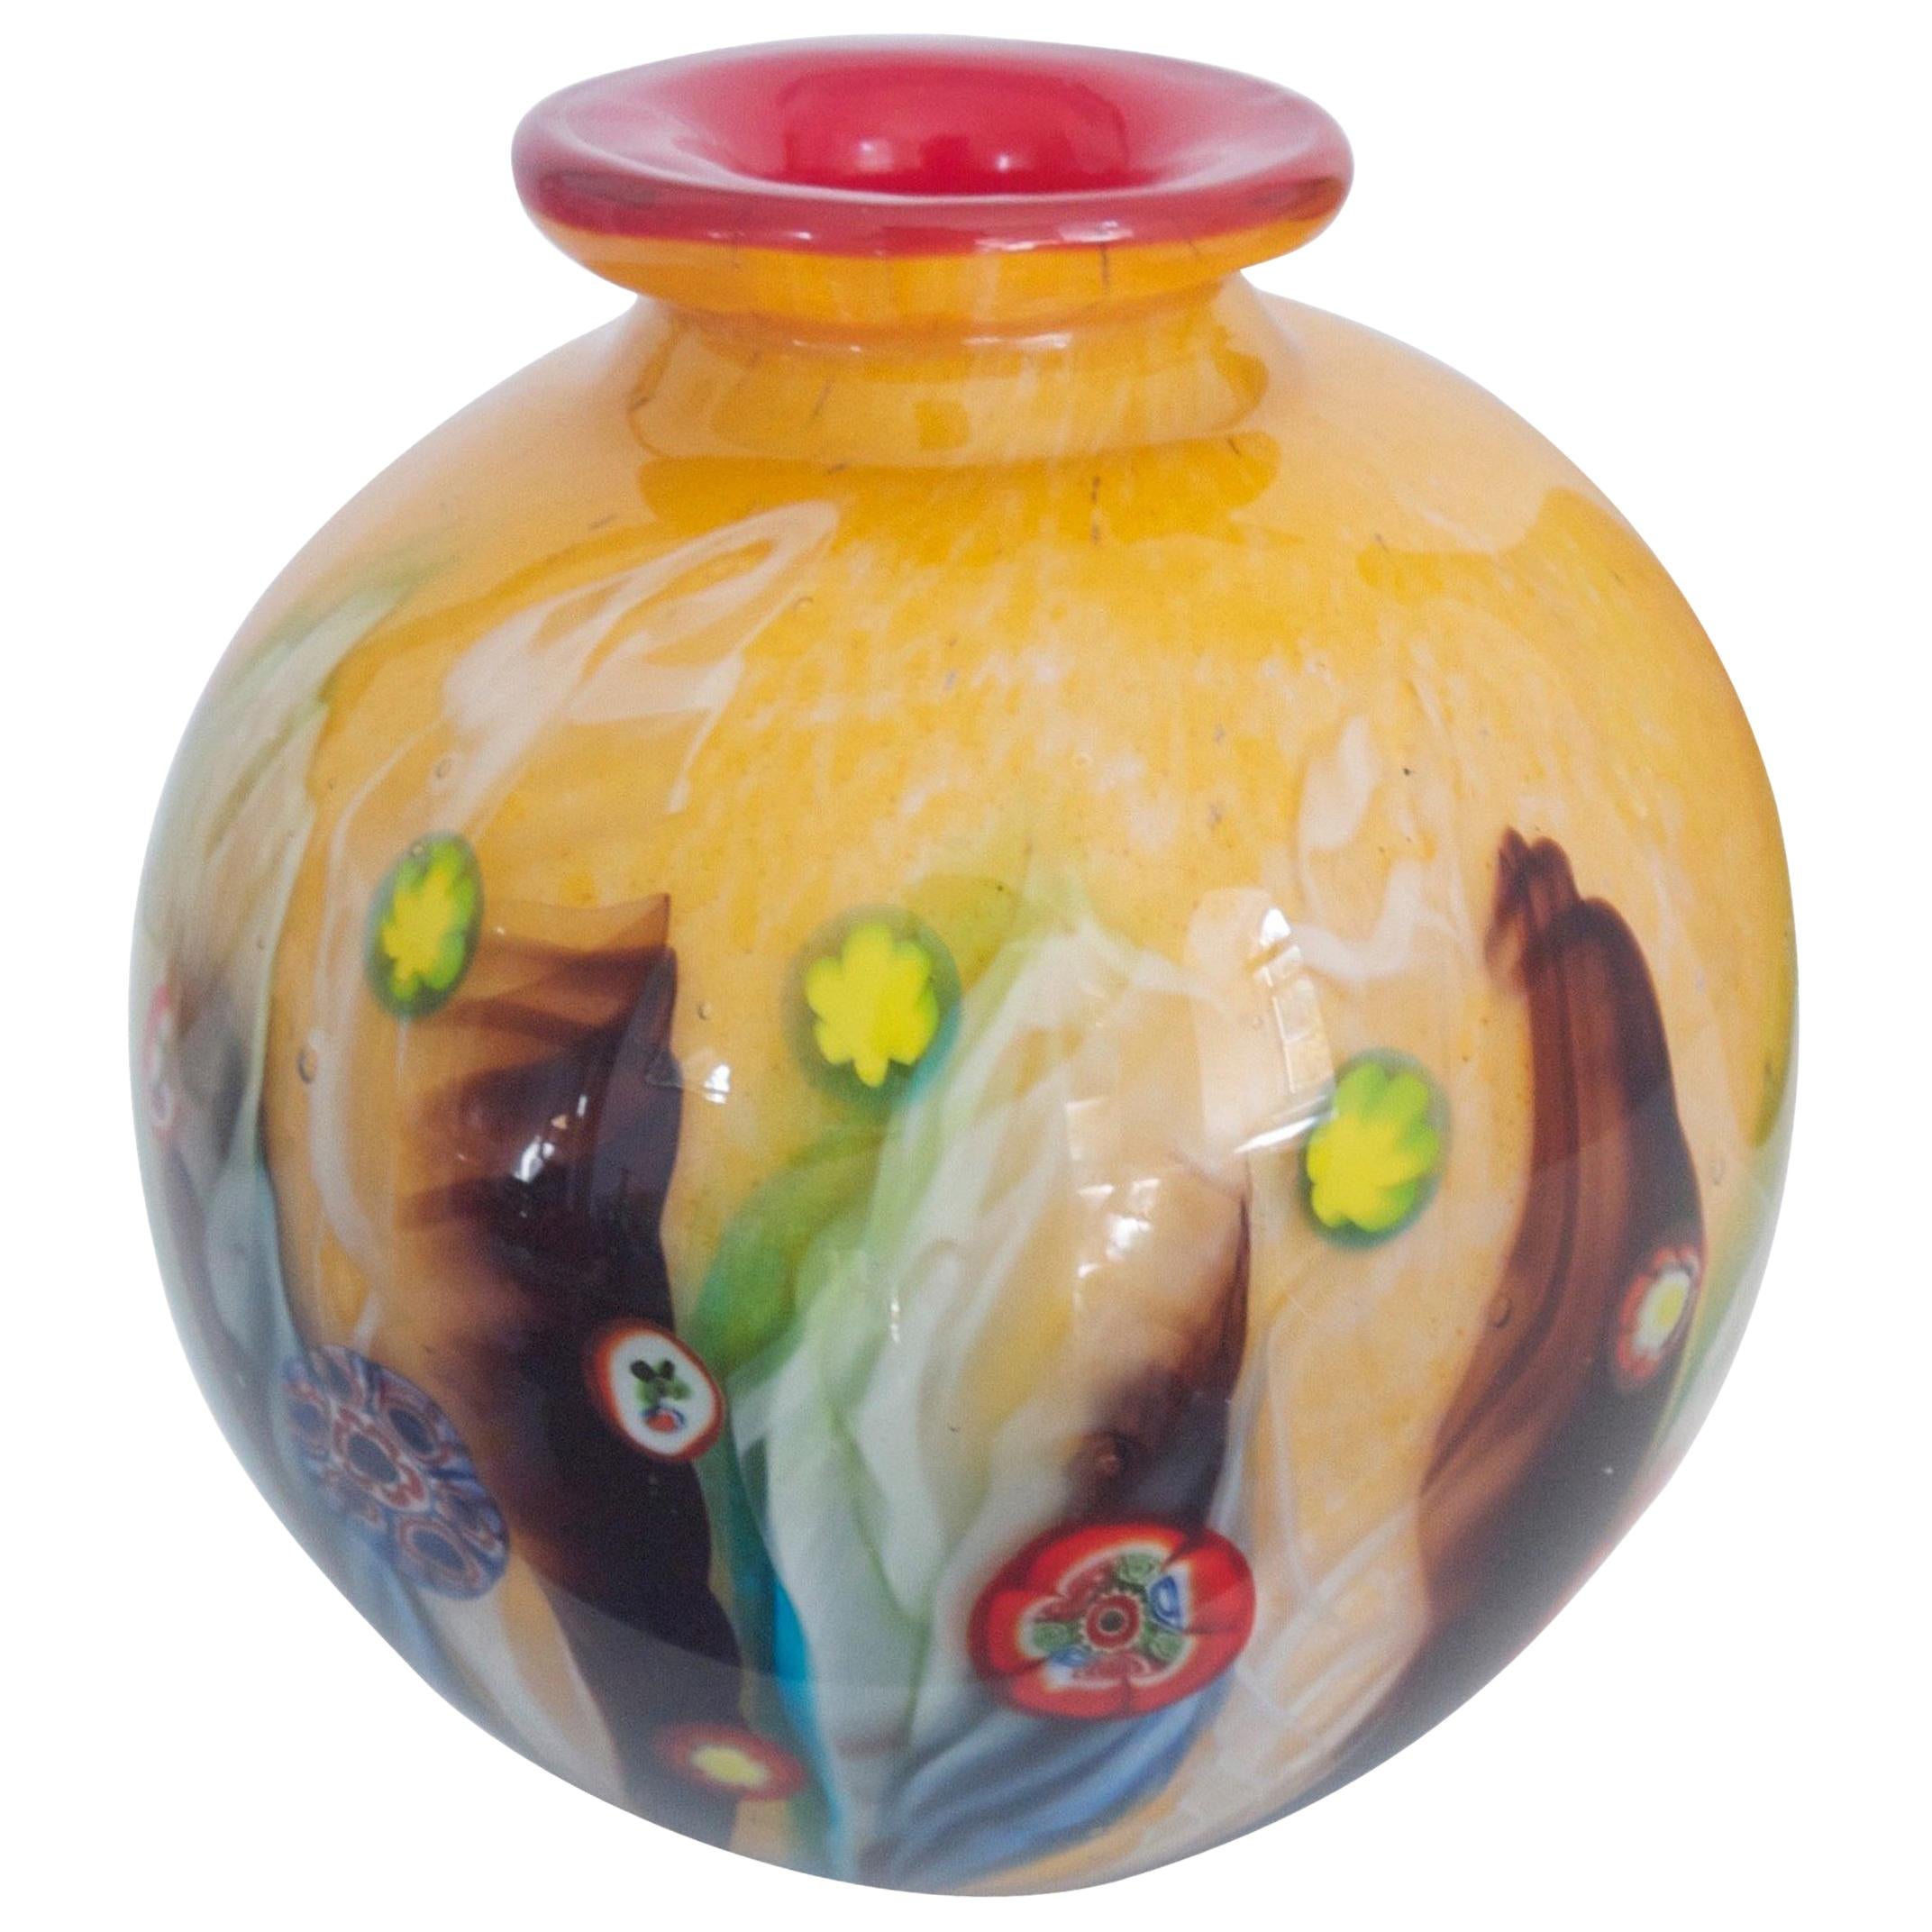 1950 Modernist Italian Murano Mille Fiori 'Orb' Glass Vase by Fratelli Toso For Sale